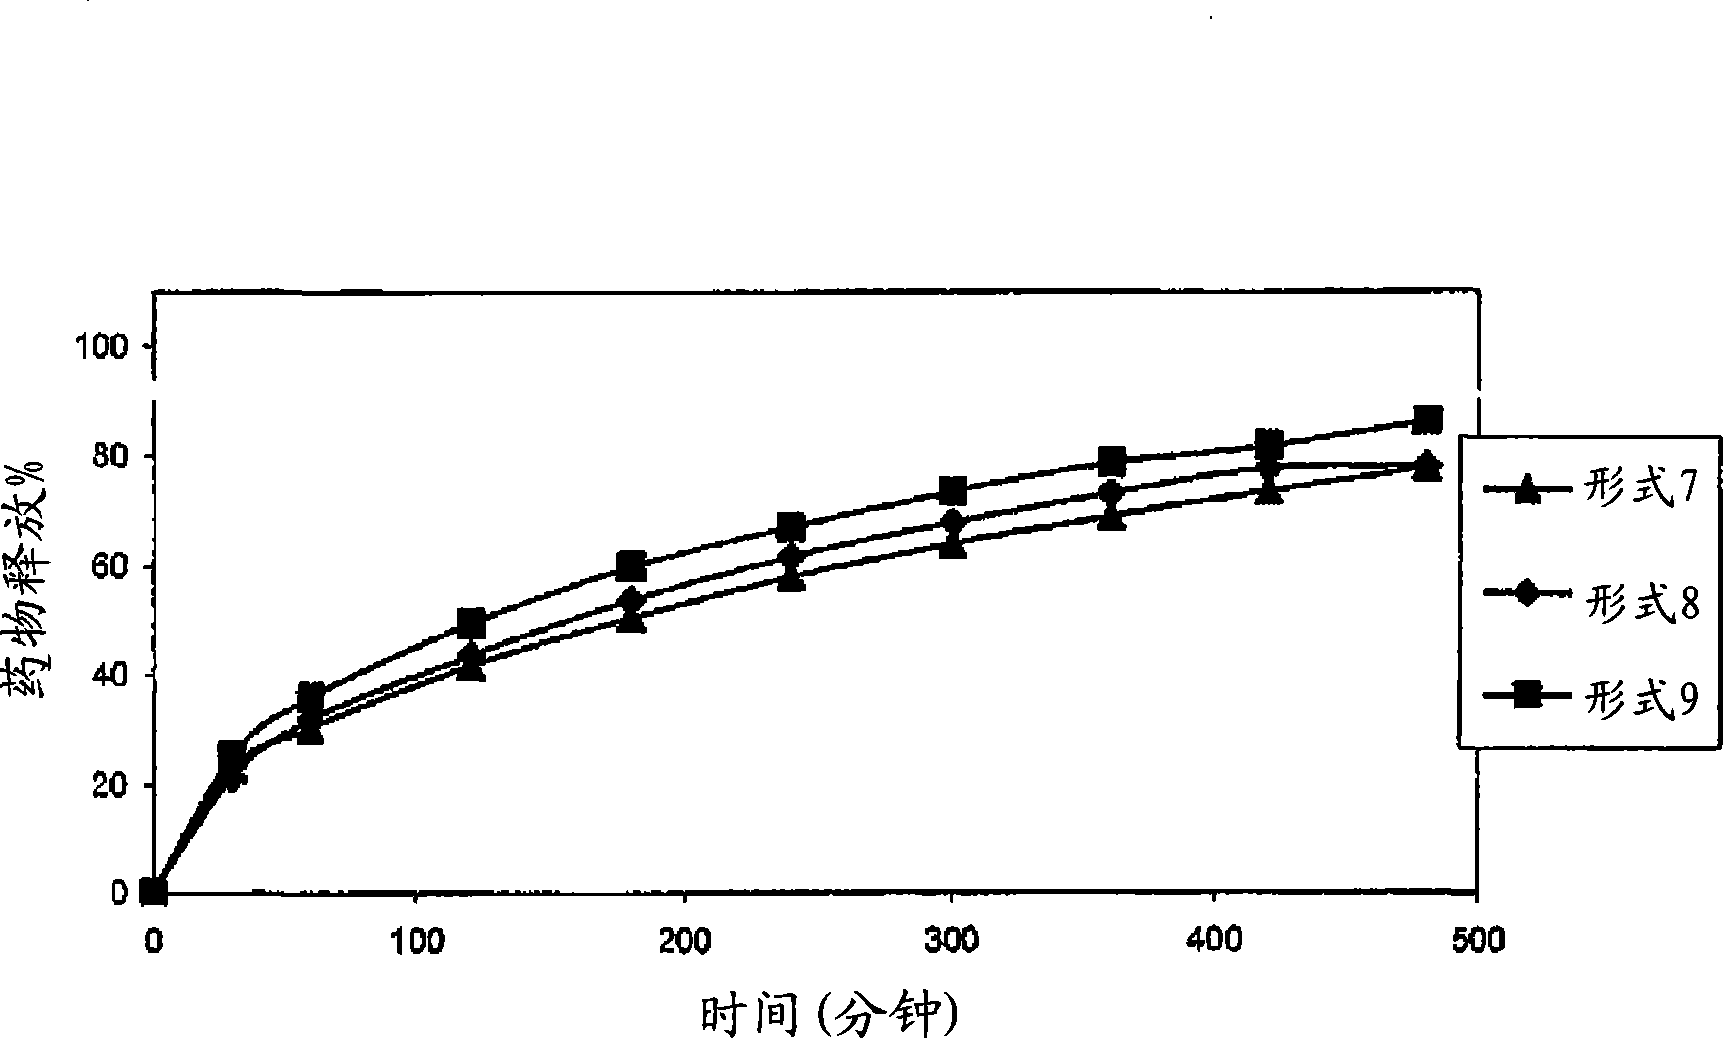 Dosage form and method for the delivery of drugs of abuse